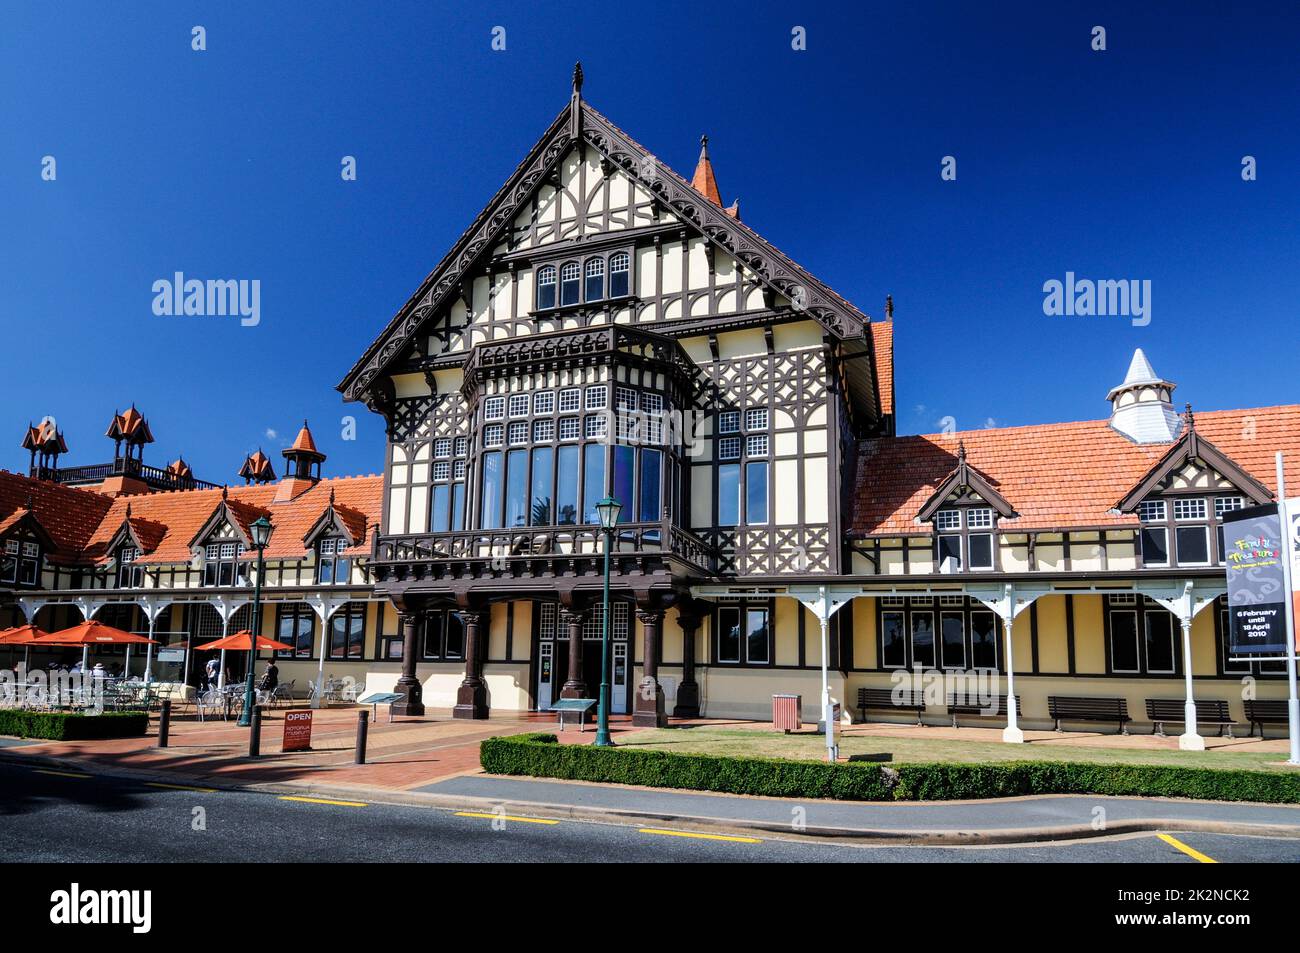 The English-styled Mock Tudor building is the former Great South Seas Spa Bath House built in 1908, is now the Rotorua Museum of Art & History set in Stock Photo